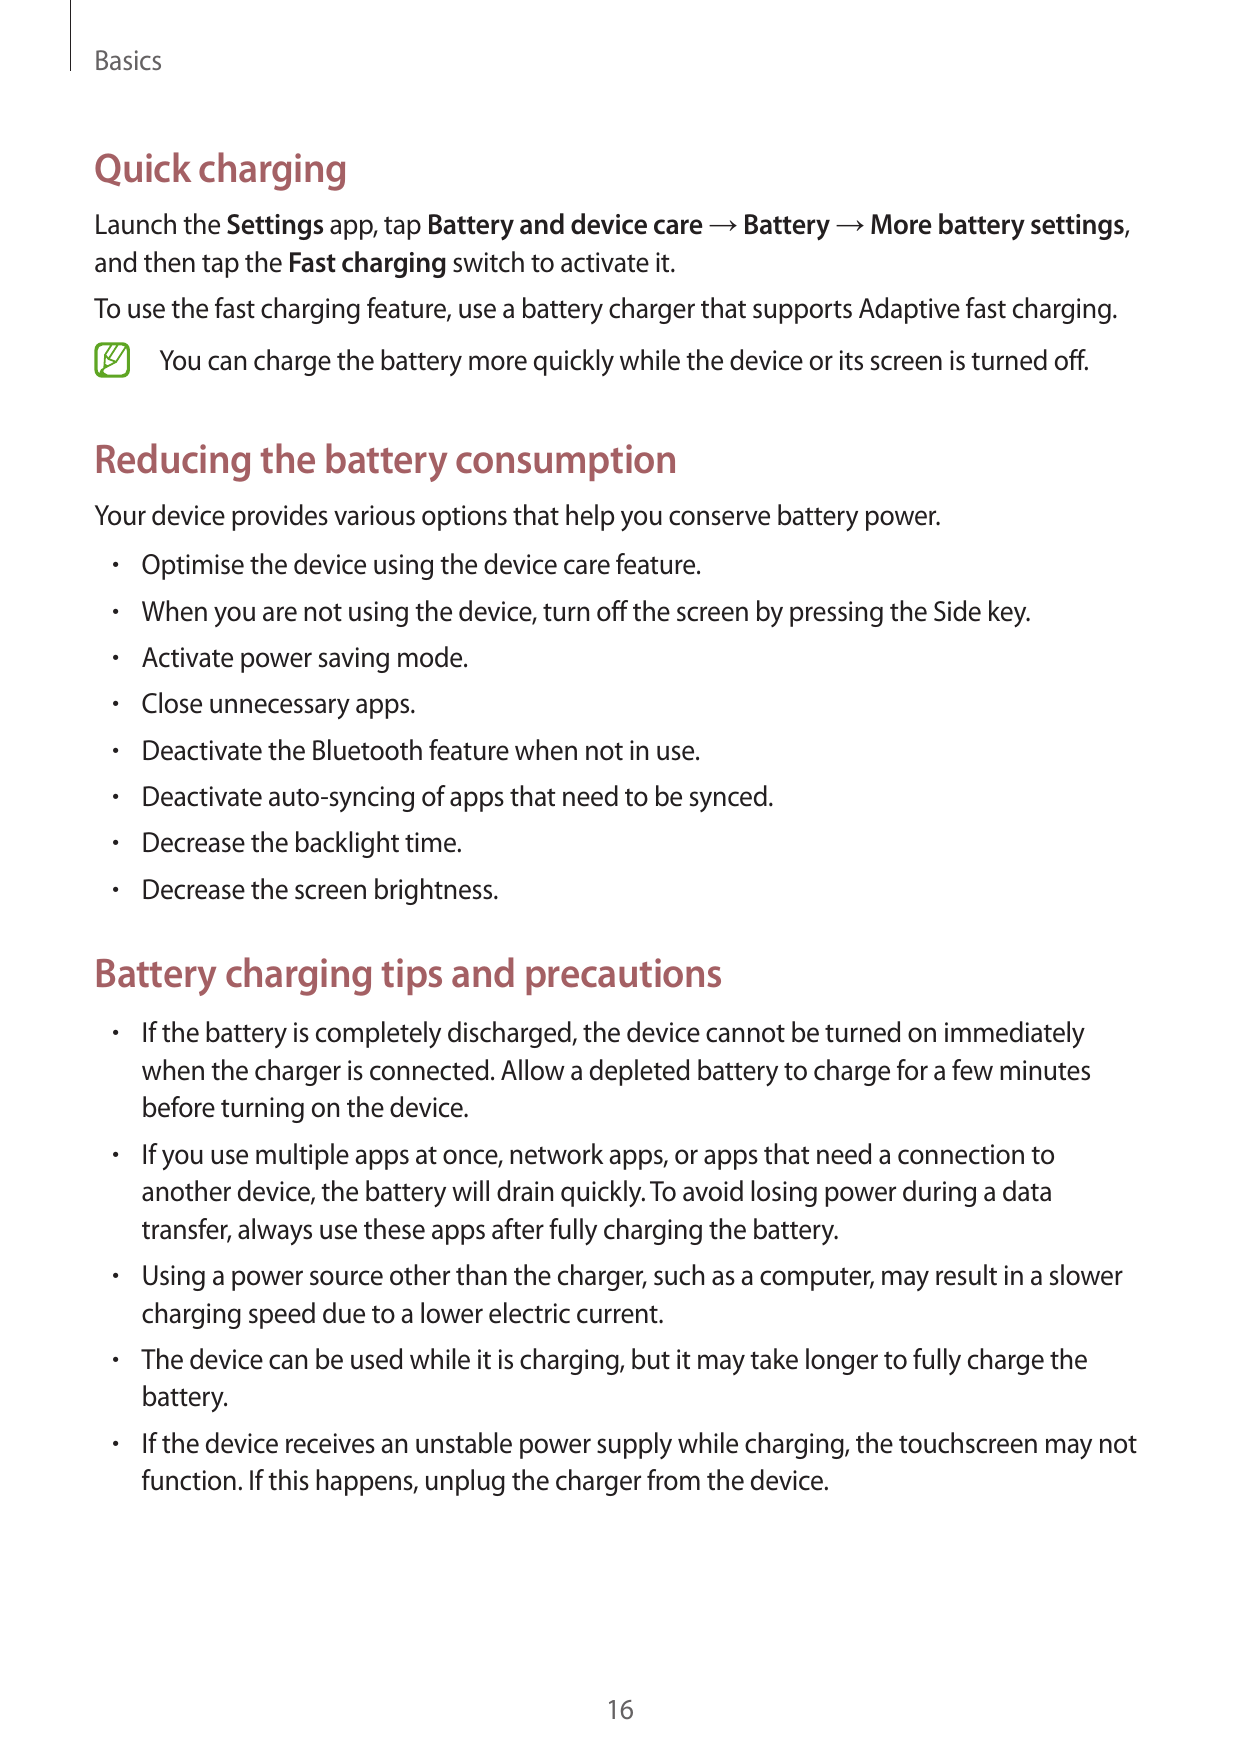 BasicsQuick chargingLaunch the Settings app, tap Battery and device care → Battery → More battery settings,and then tap the Fast